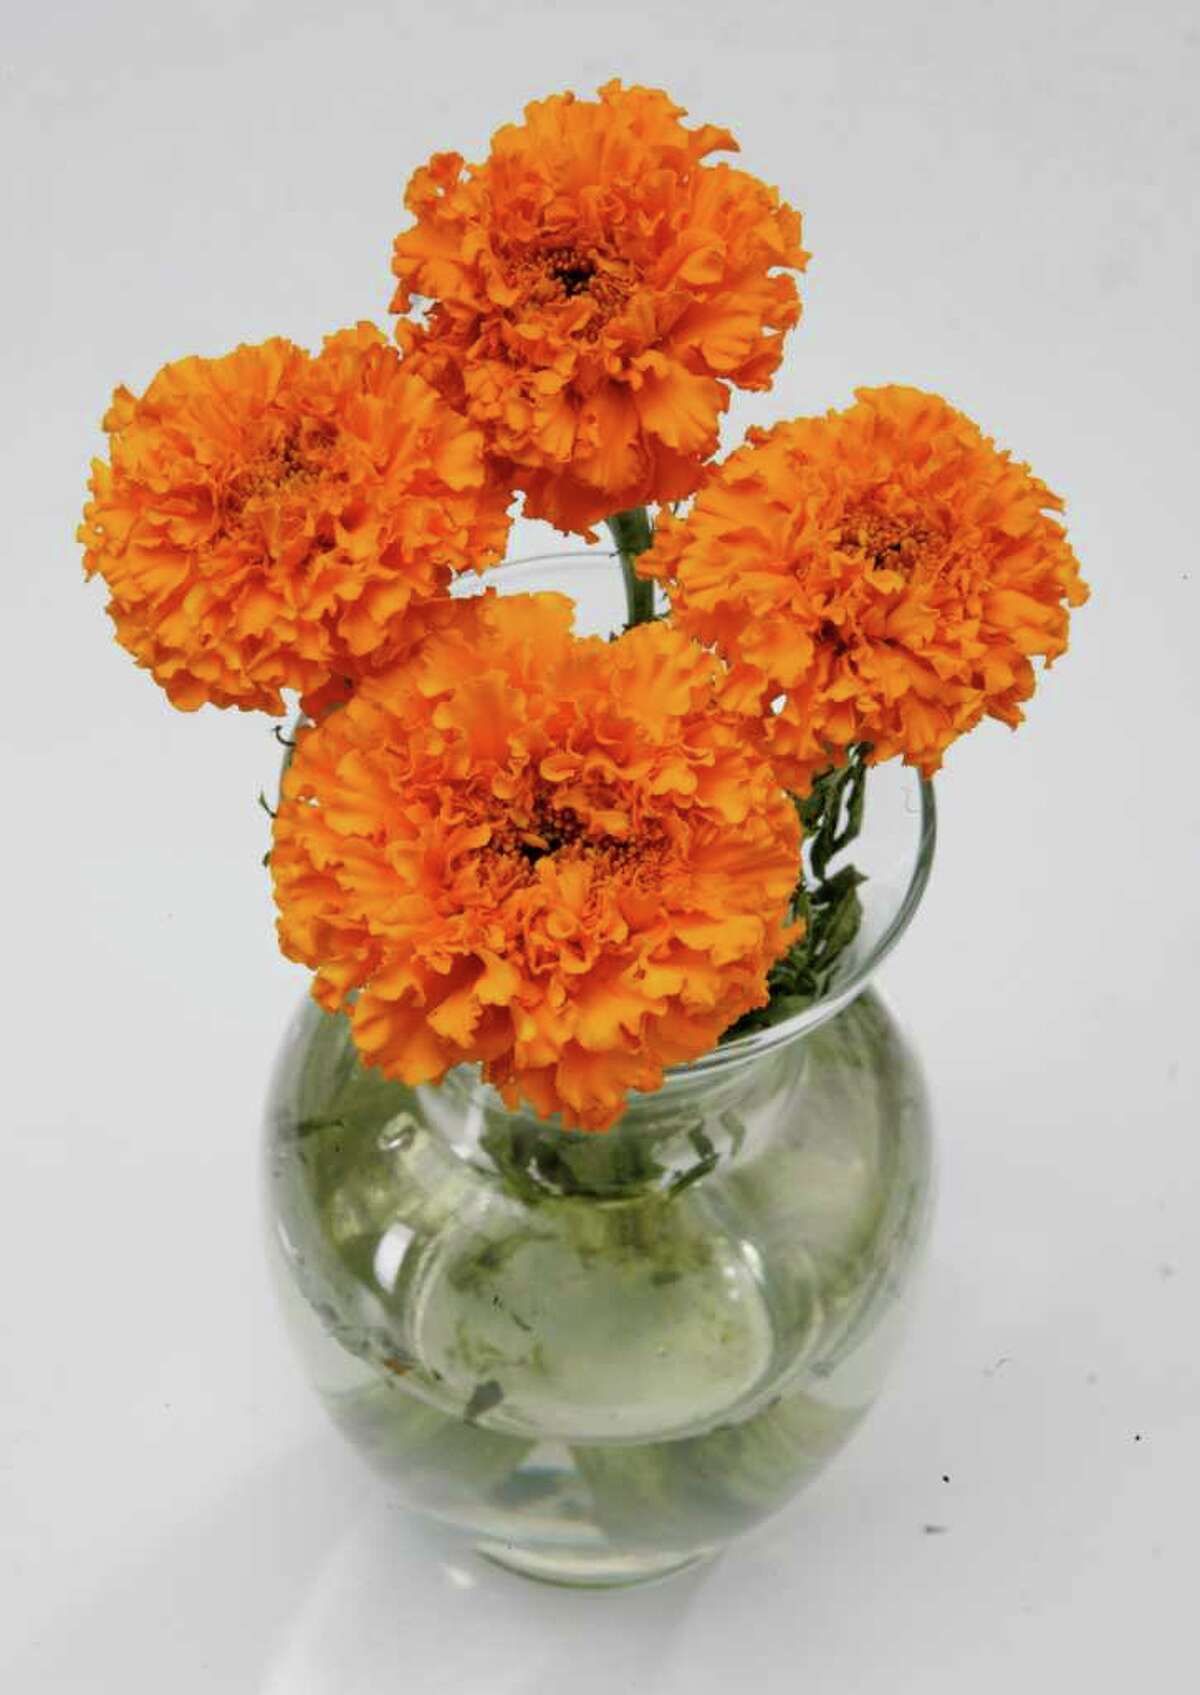 3 Marigolds, a traditional flower placed on graves and altars during Dia de los Muertos. From Fannin Flowers. Shoot from top to show buds only (AC Studios for the Chronicle) HOUCHRON CAPTION (10/31/2004-2-STAR) SECNEWS COLORFRONT: The altars are ready, the sweet bread baking. HOUCHRON CAPTION (10/31/2004) SECSTAR COLORFRONT: NONE